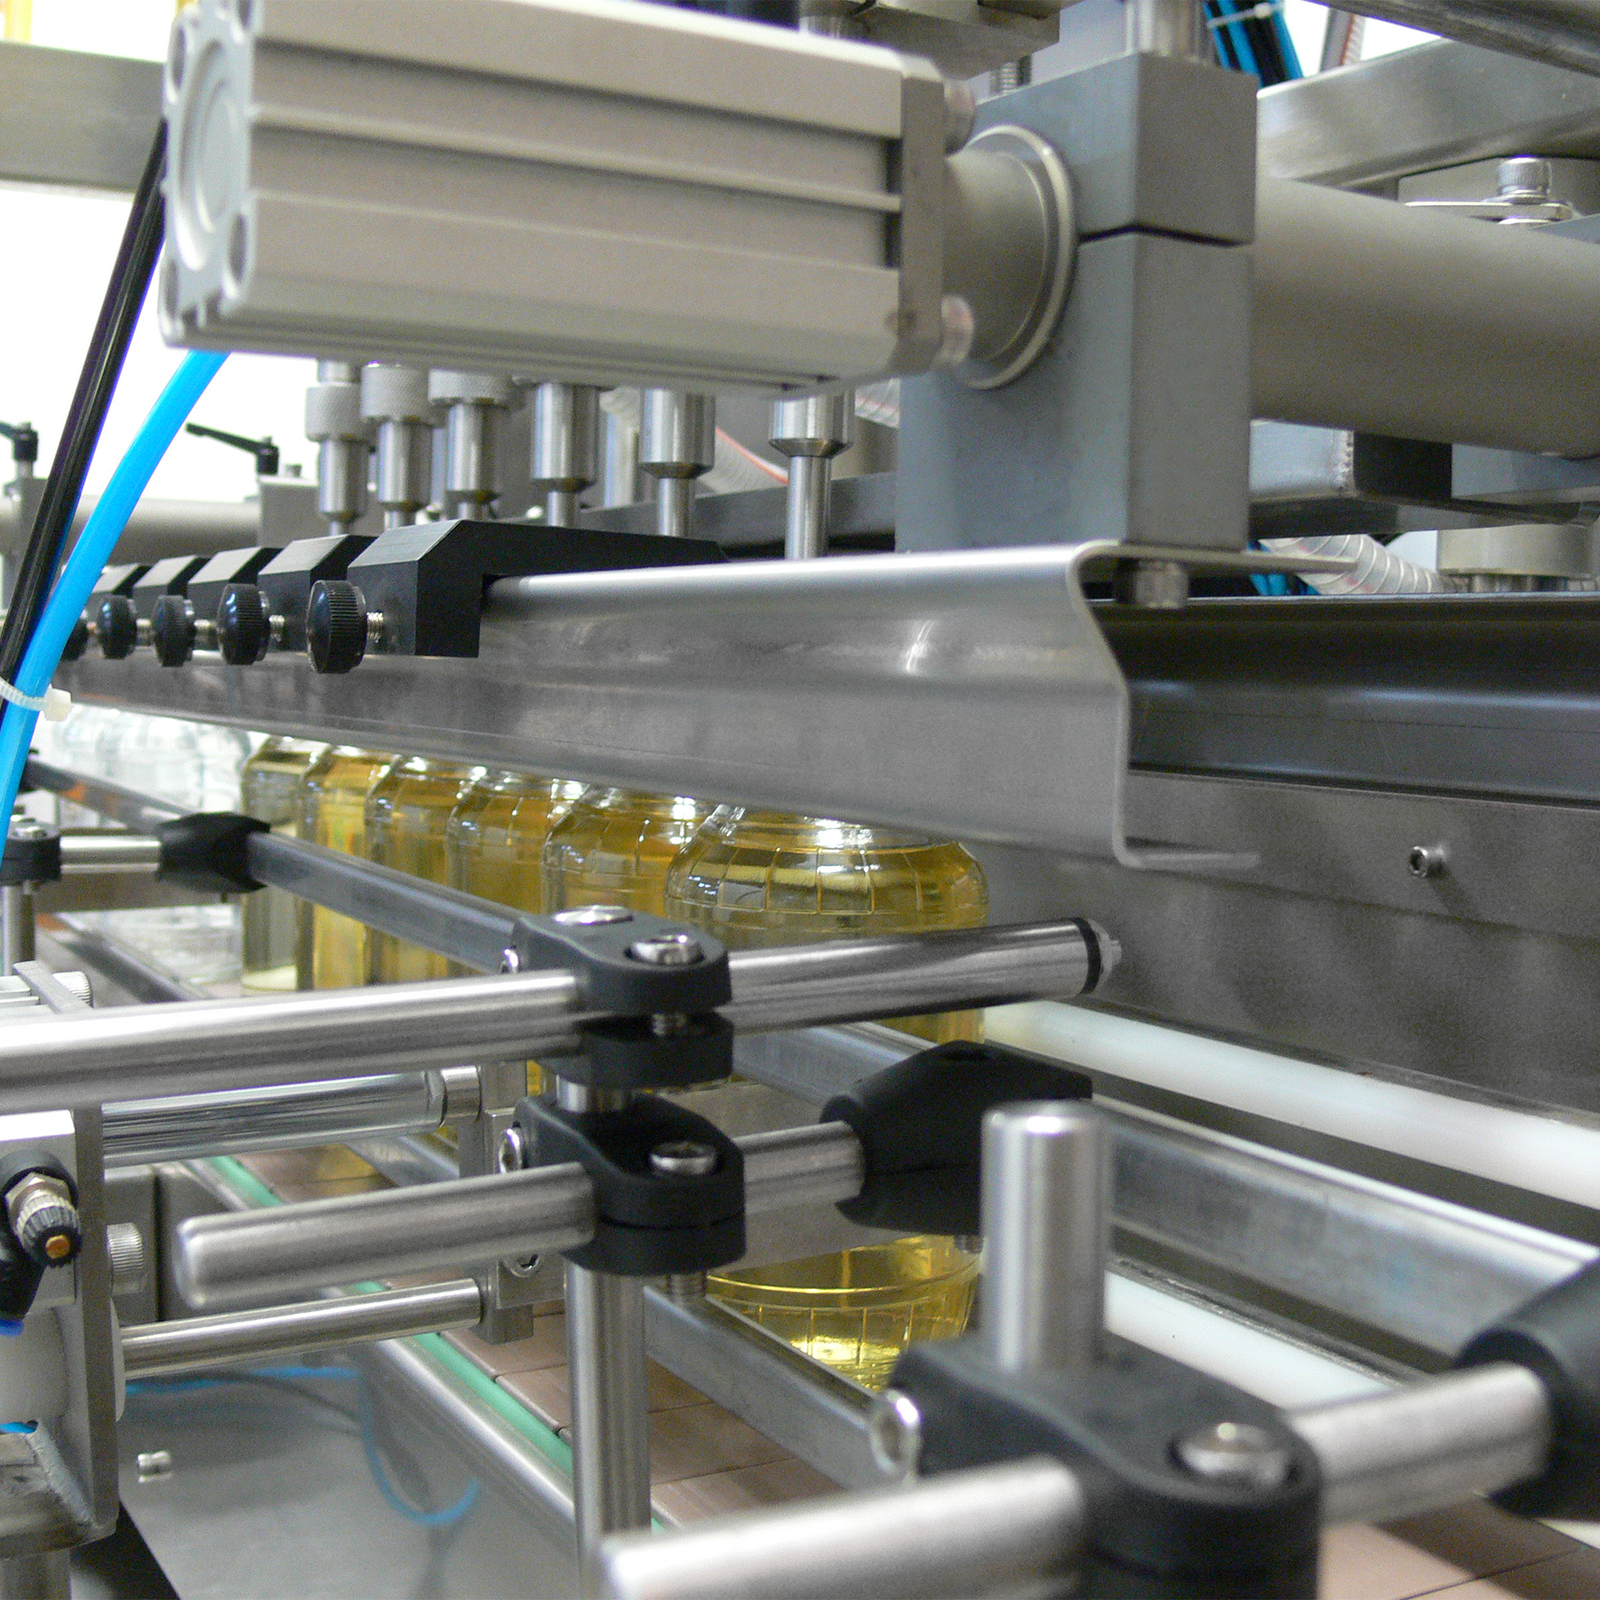 closeup of the 6 heads of the liquid filling machine dispensing liquid into 6 clear containers